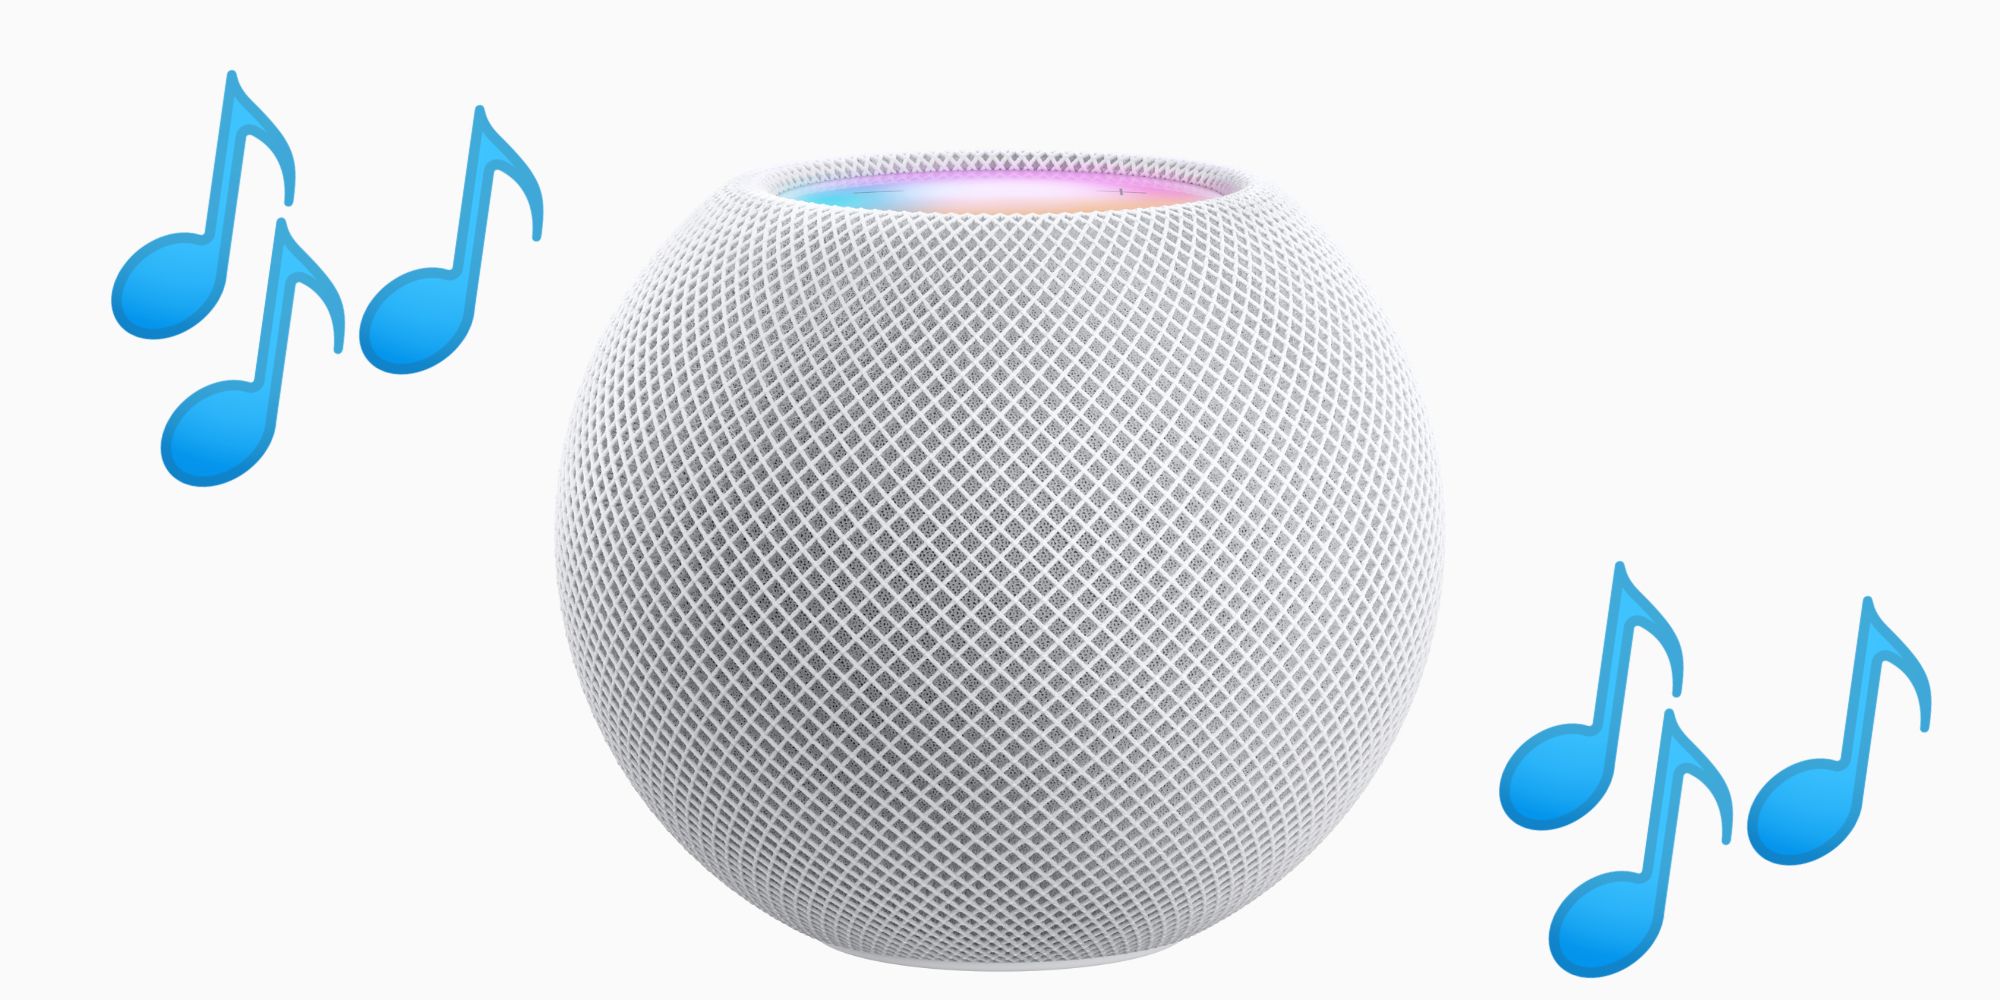 Which music services are supported on the HomePod?